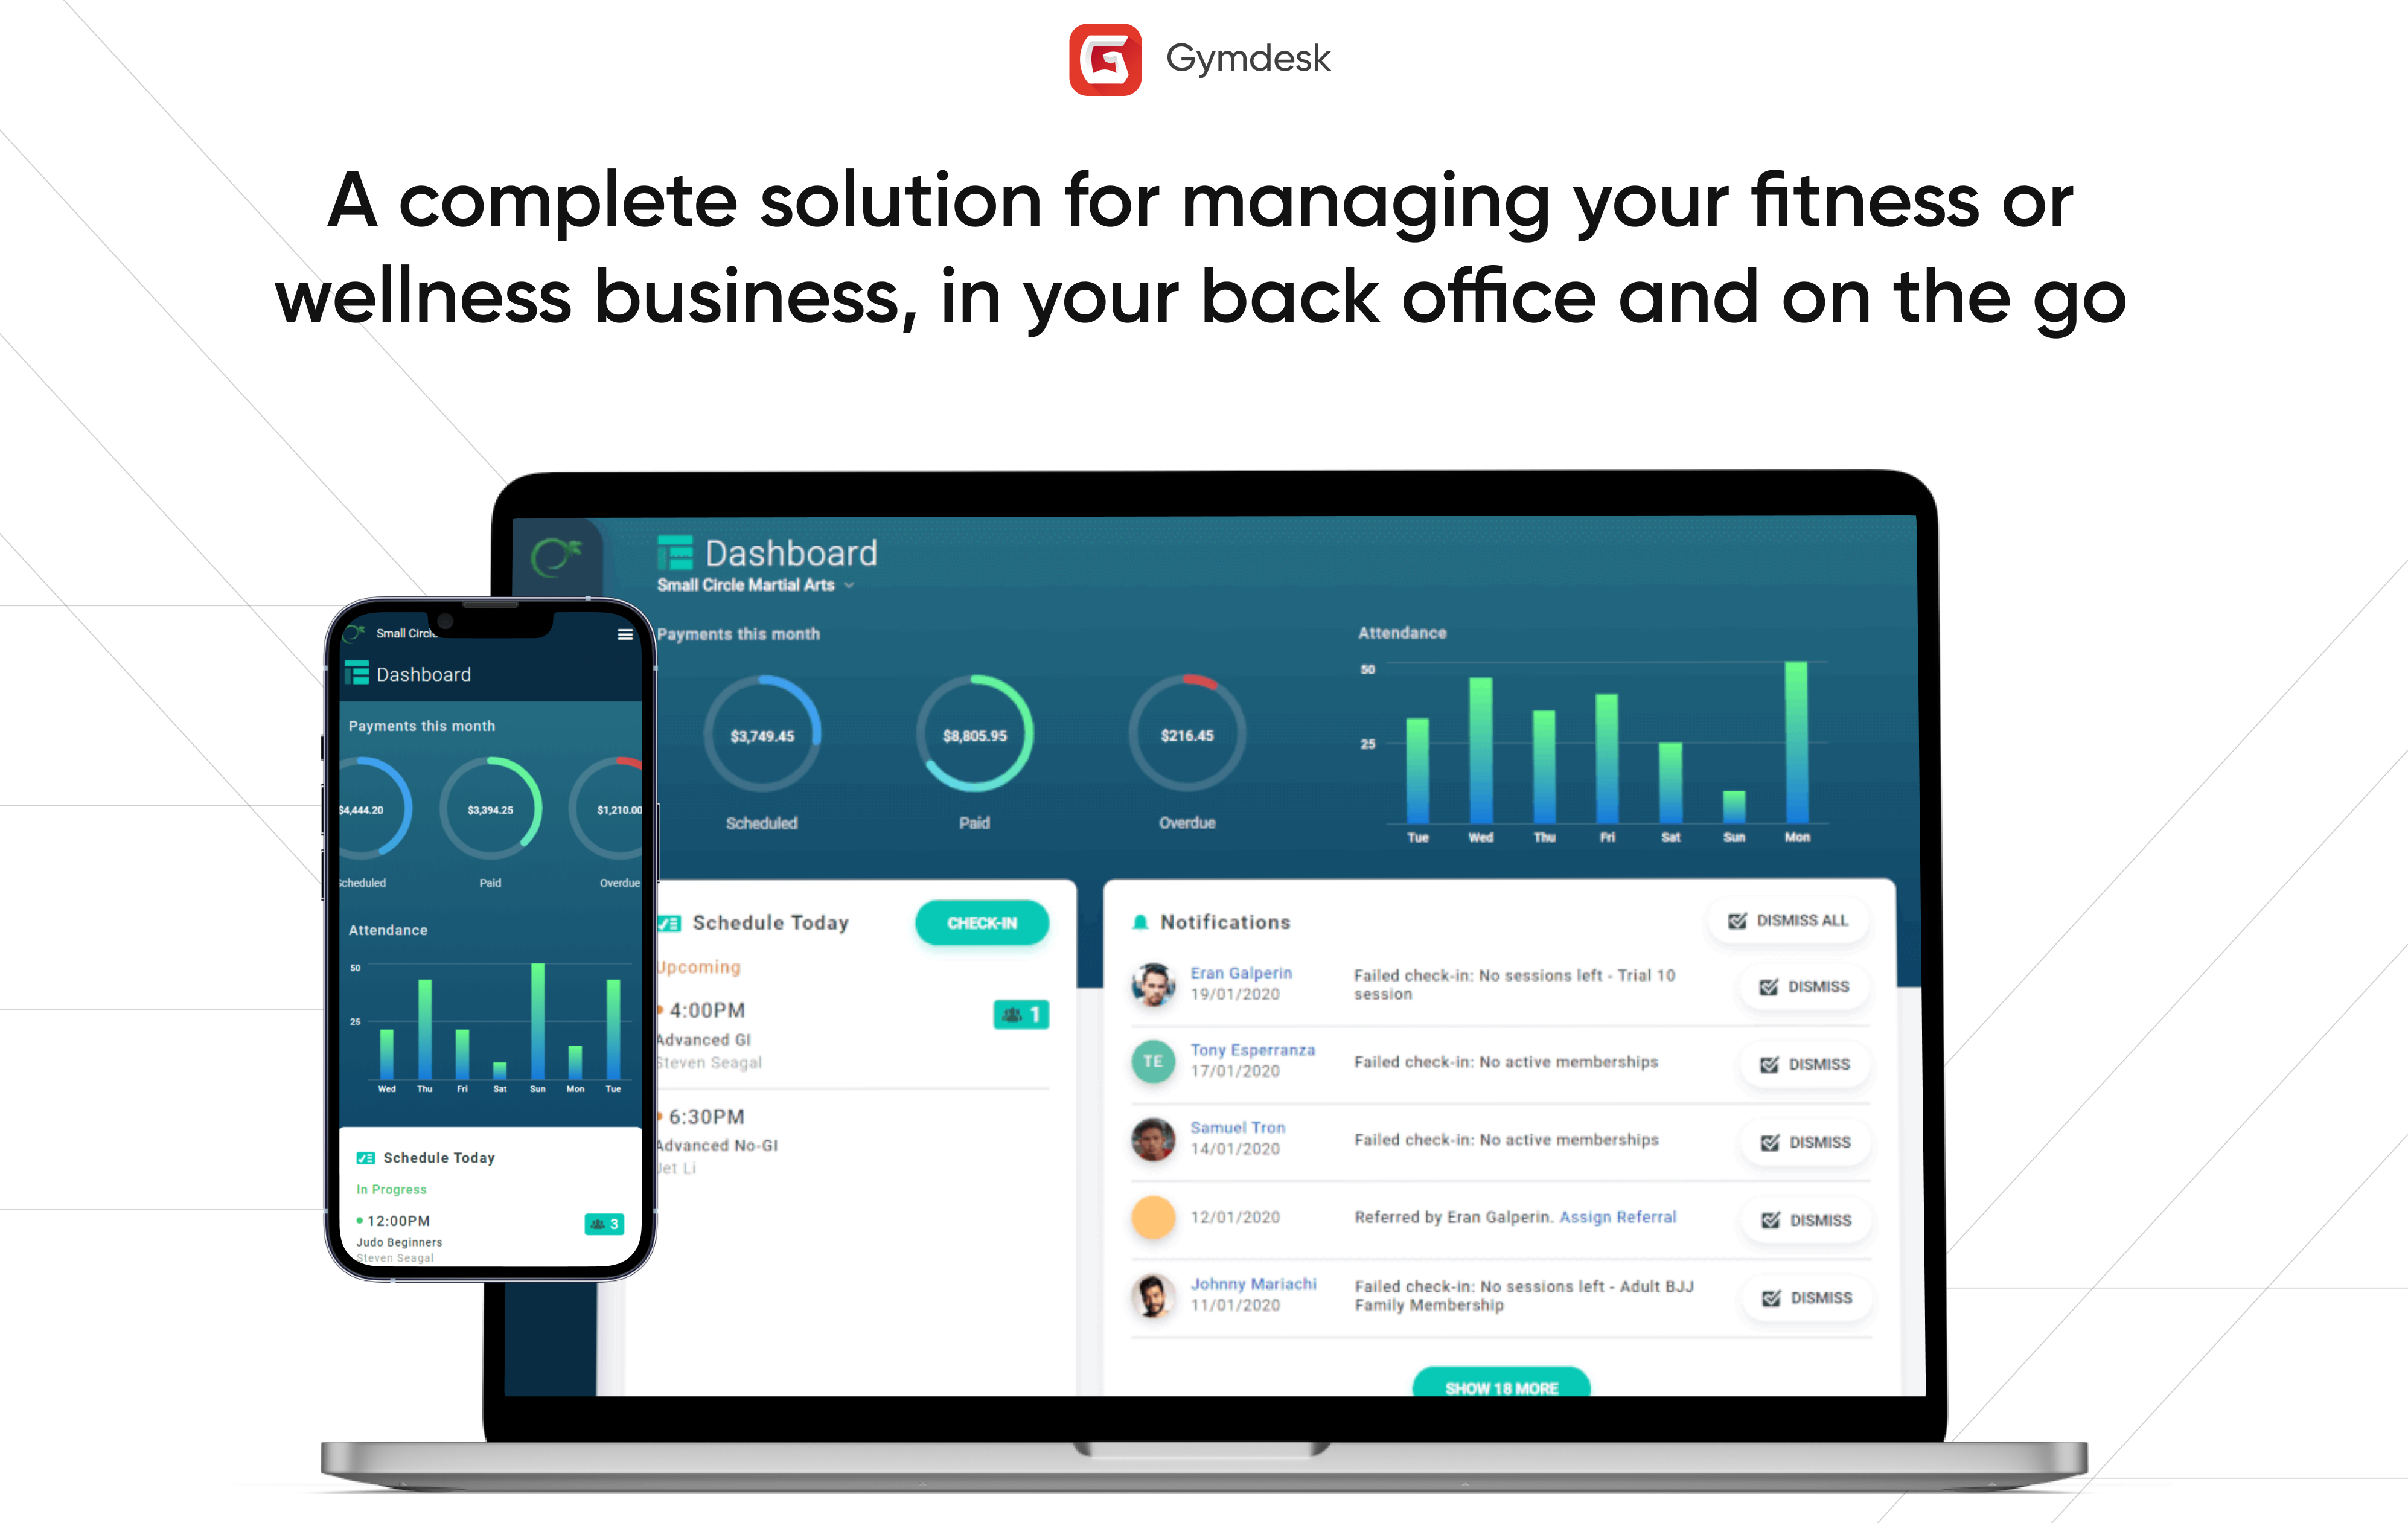 A quick dashboard shows you everything that is happening in your business